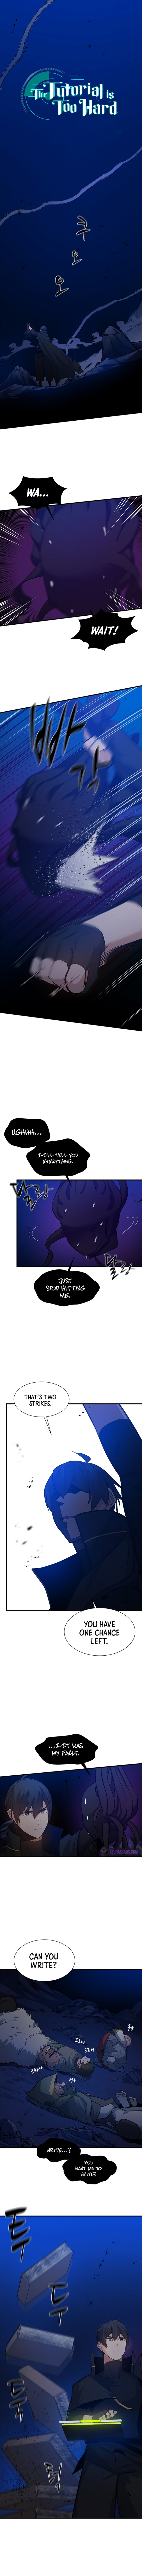 The Tutorial is Too Hard - Chapter 102 Page 3